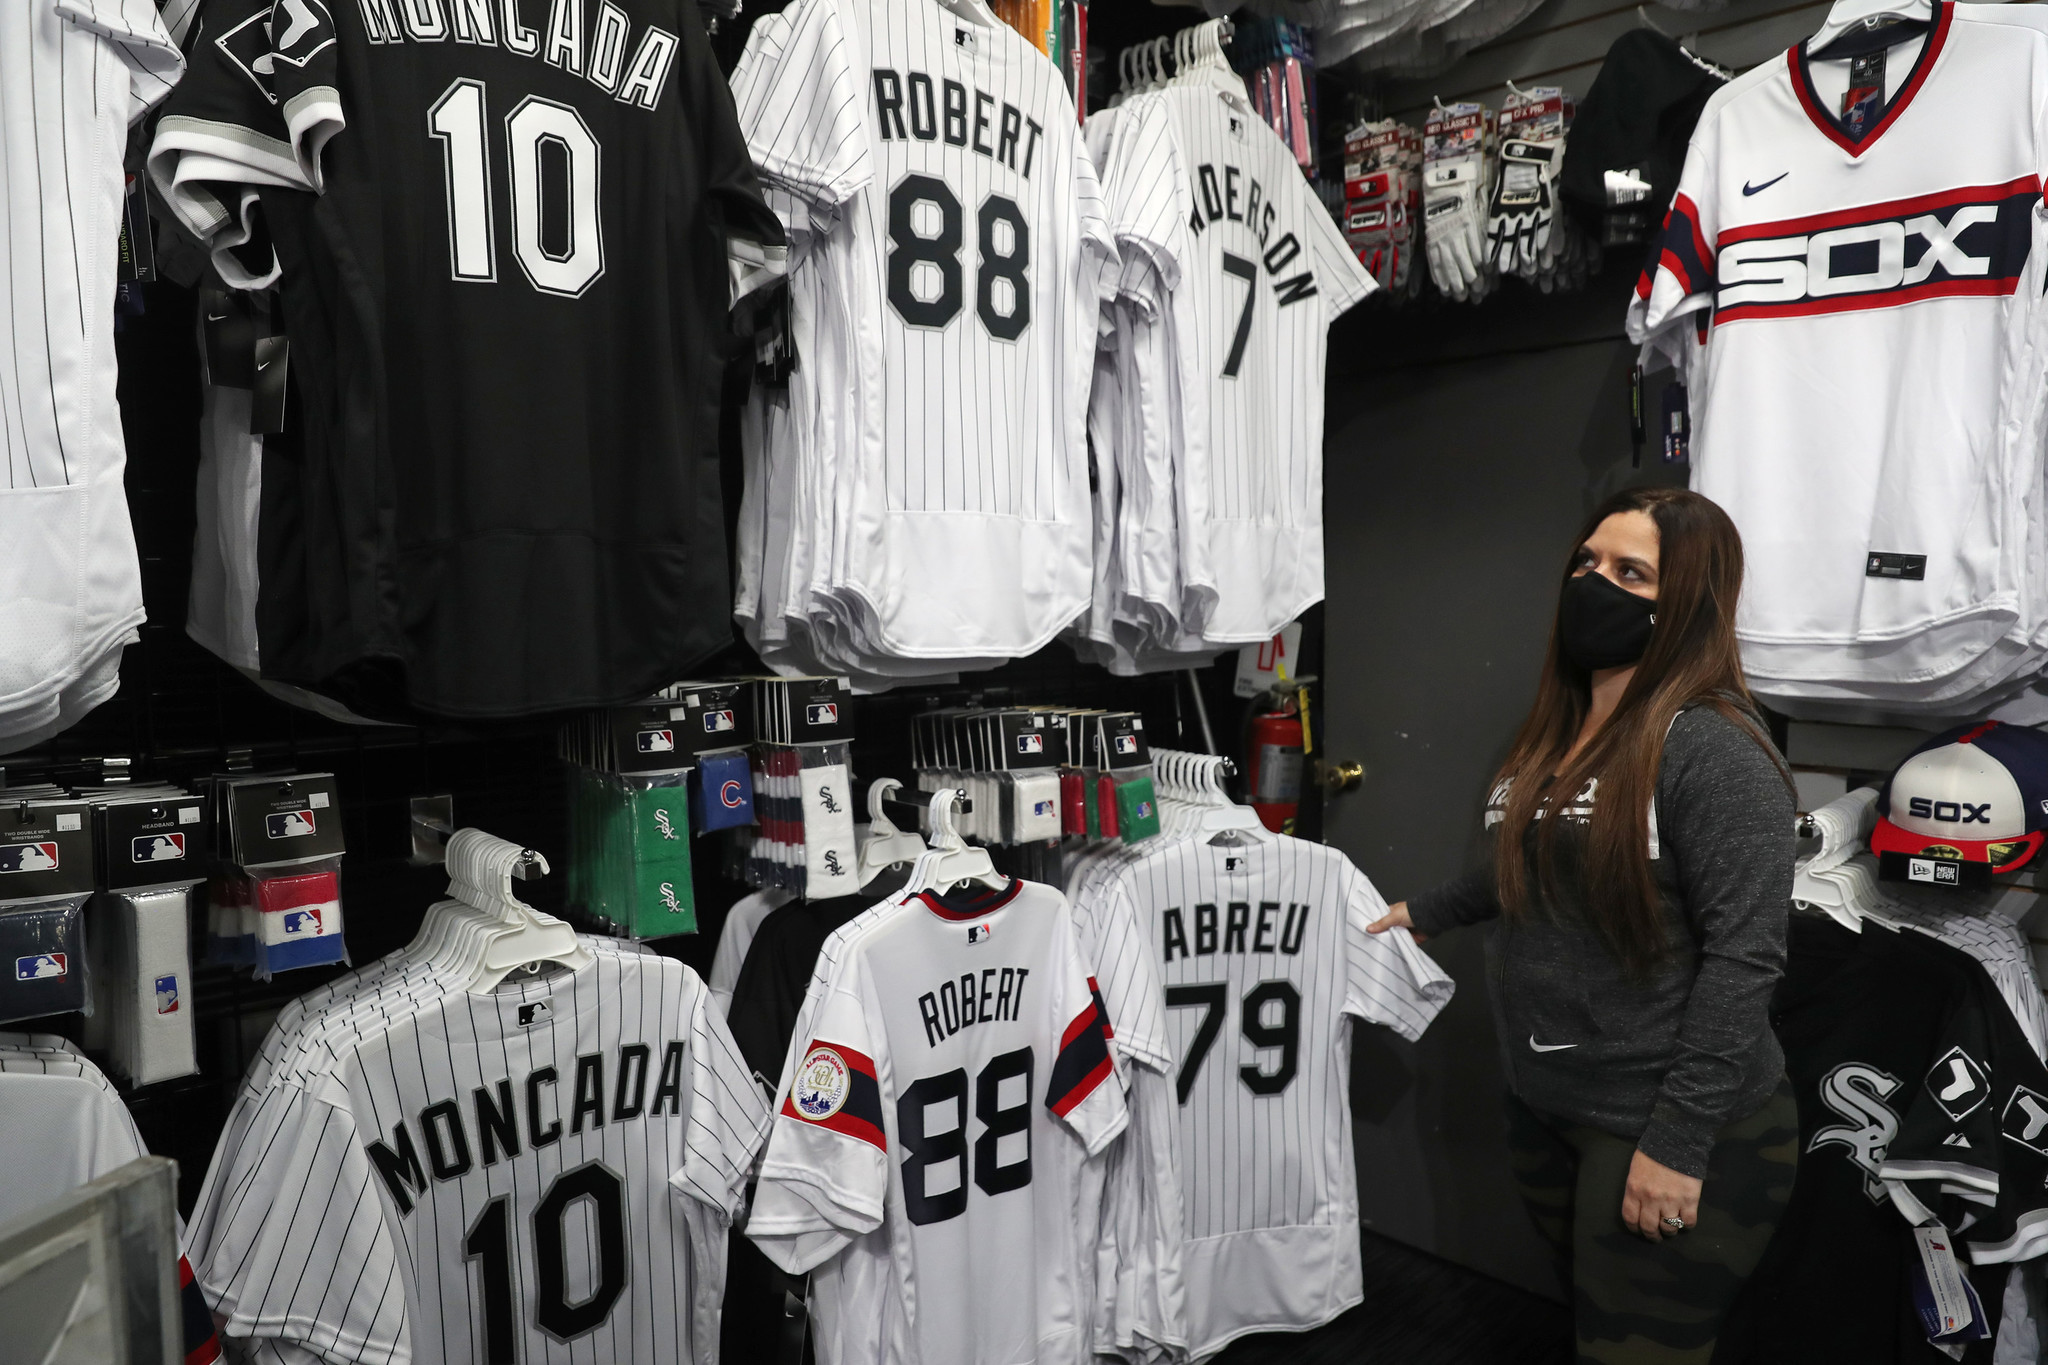 White Sox merchandise sales on the rise